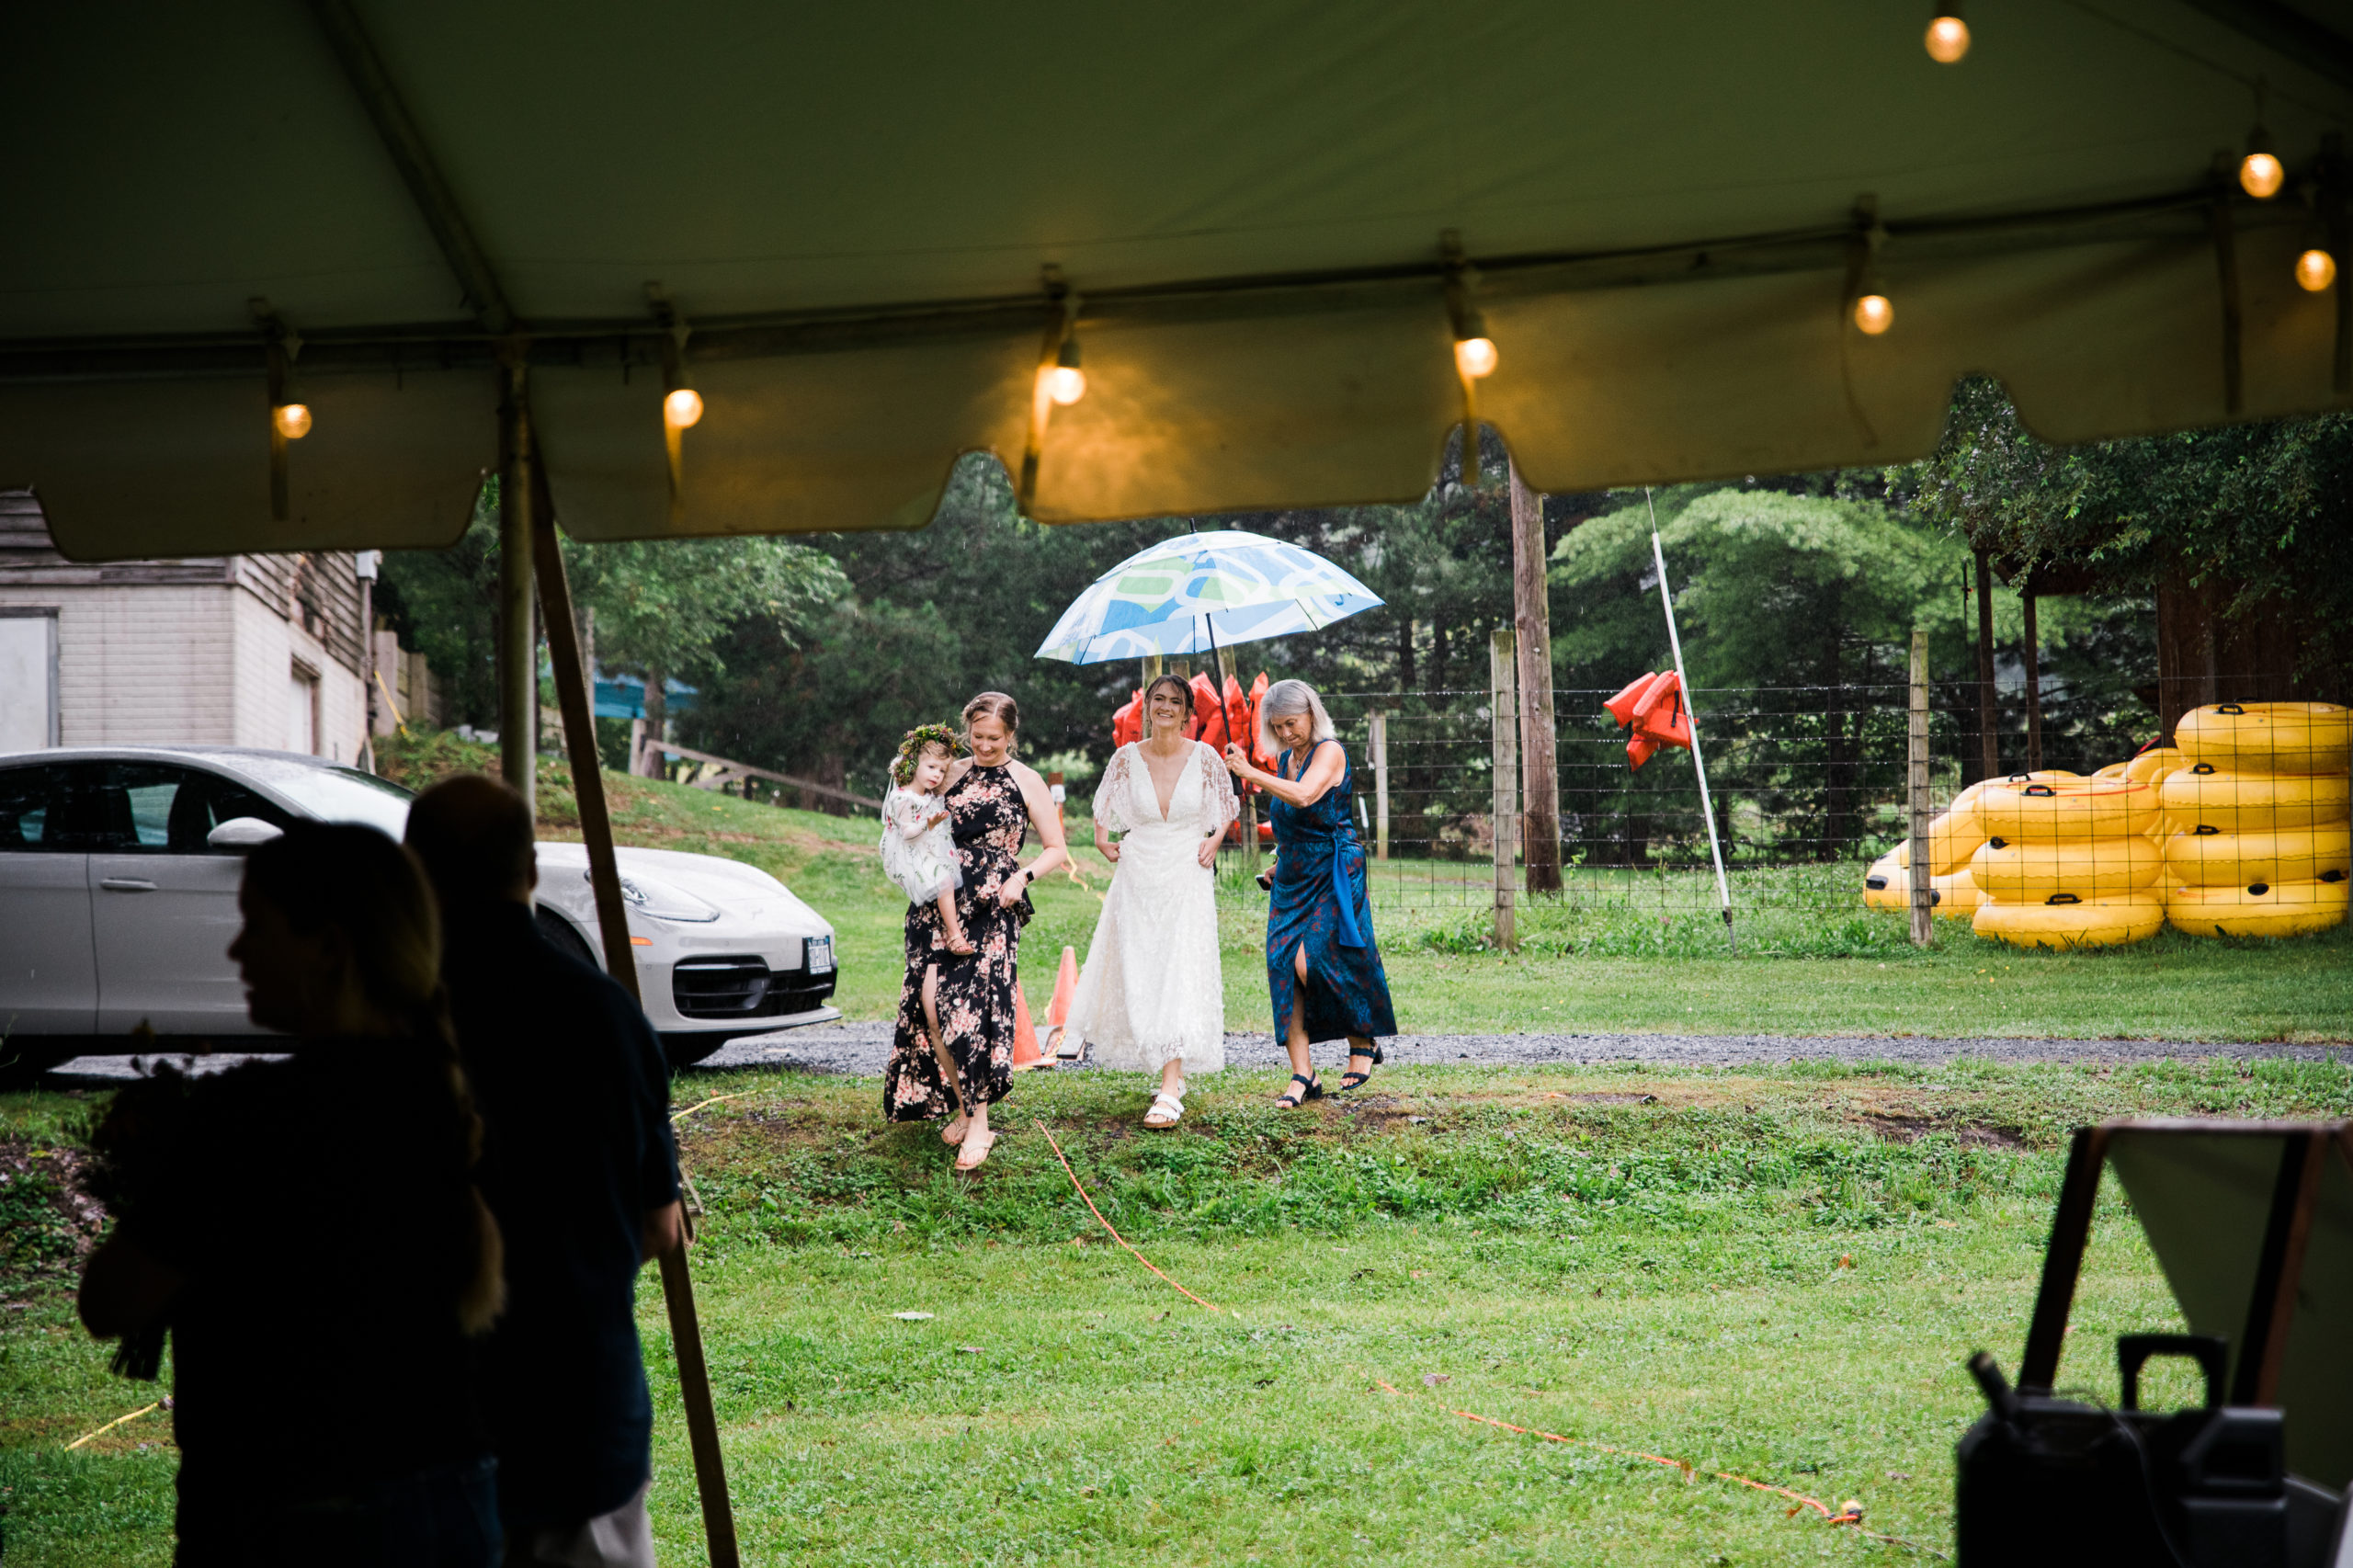 The bride arriving at a wedding ceremony with two women holding an umbrella over her head